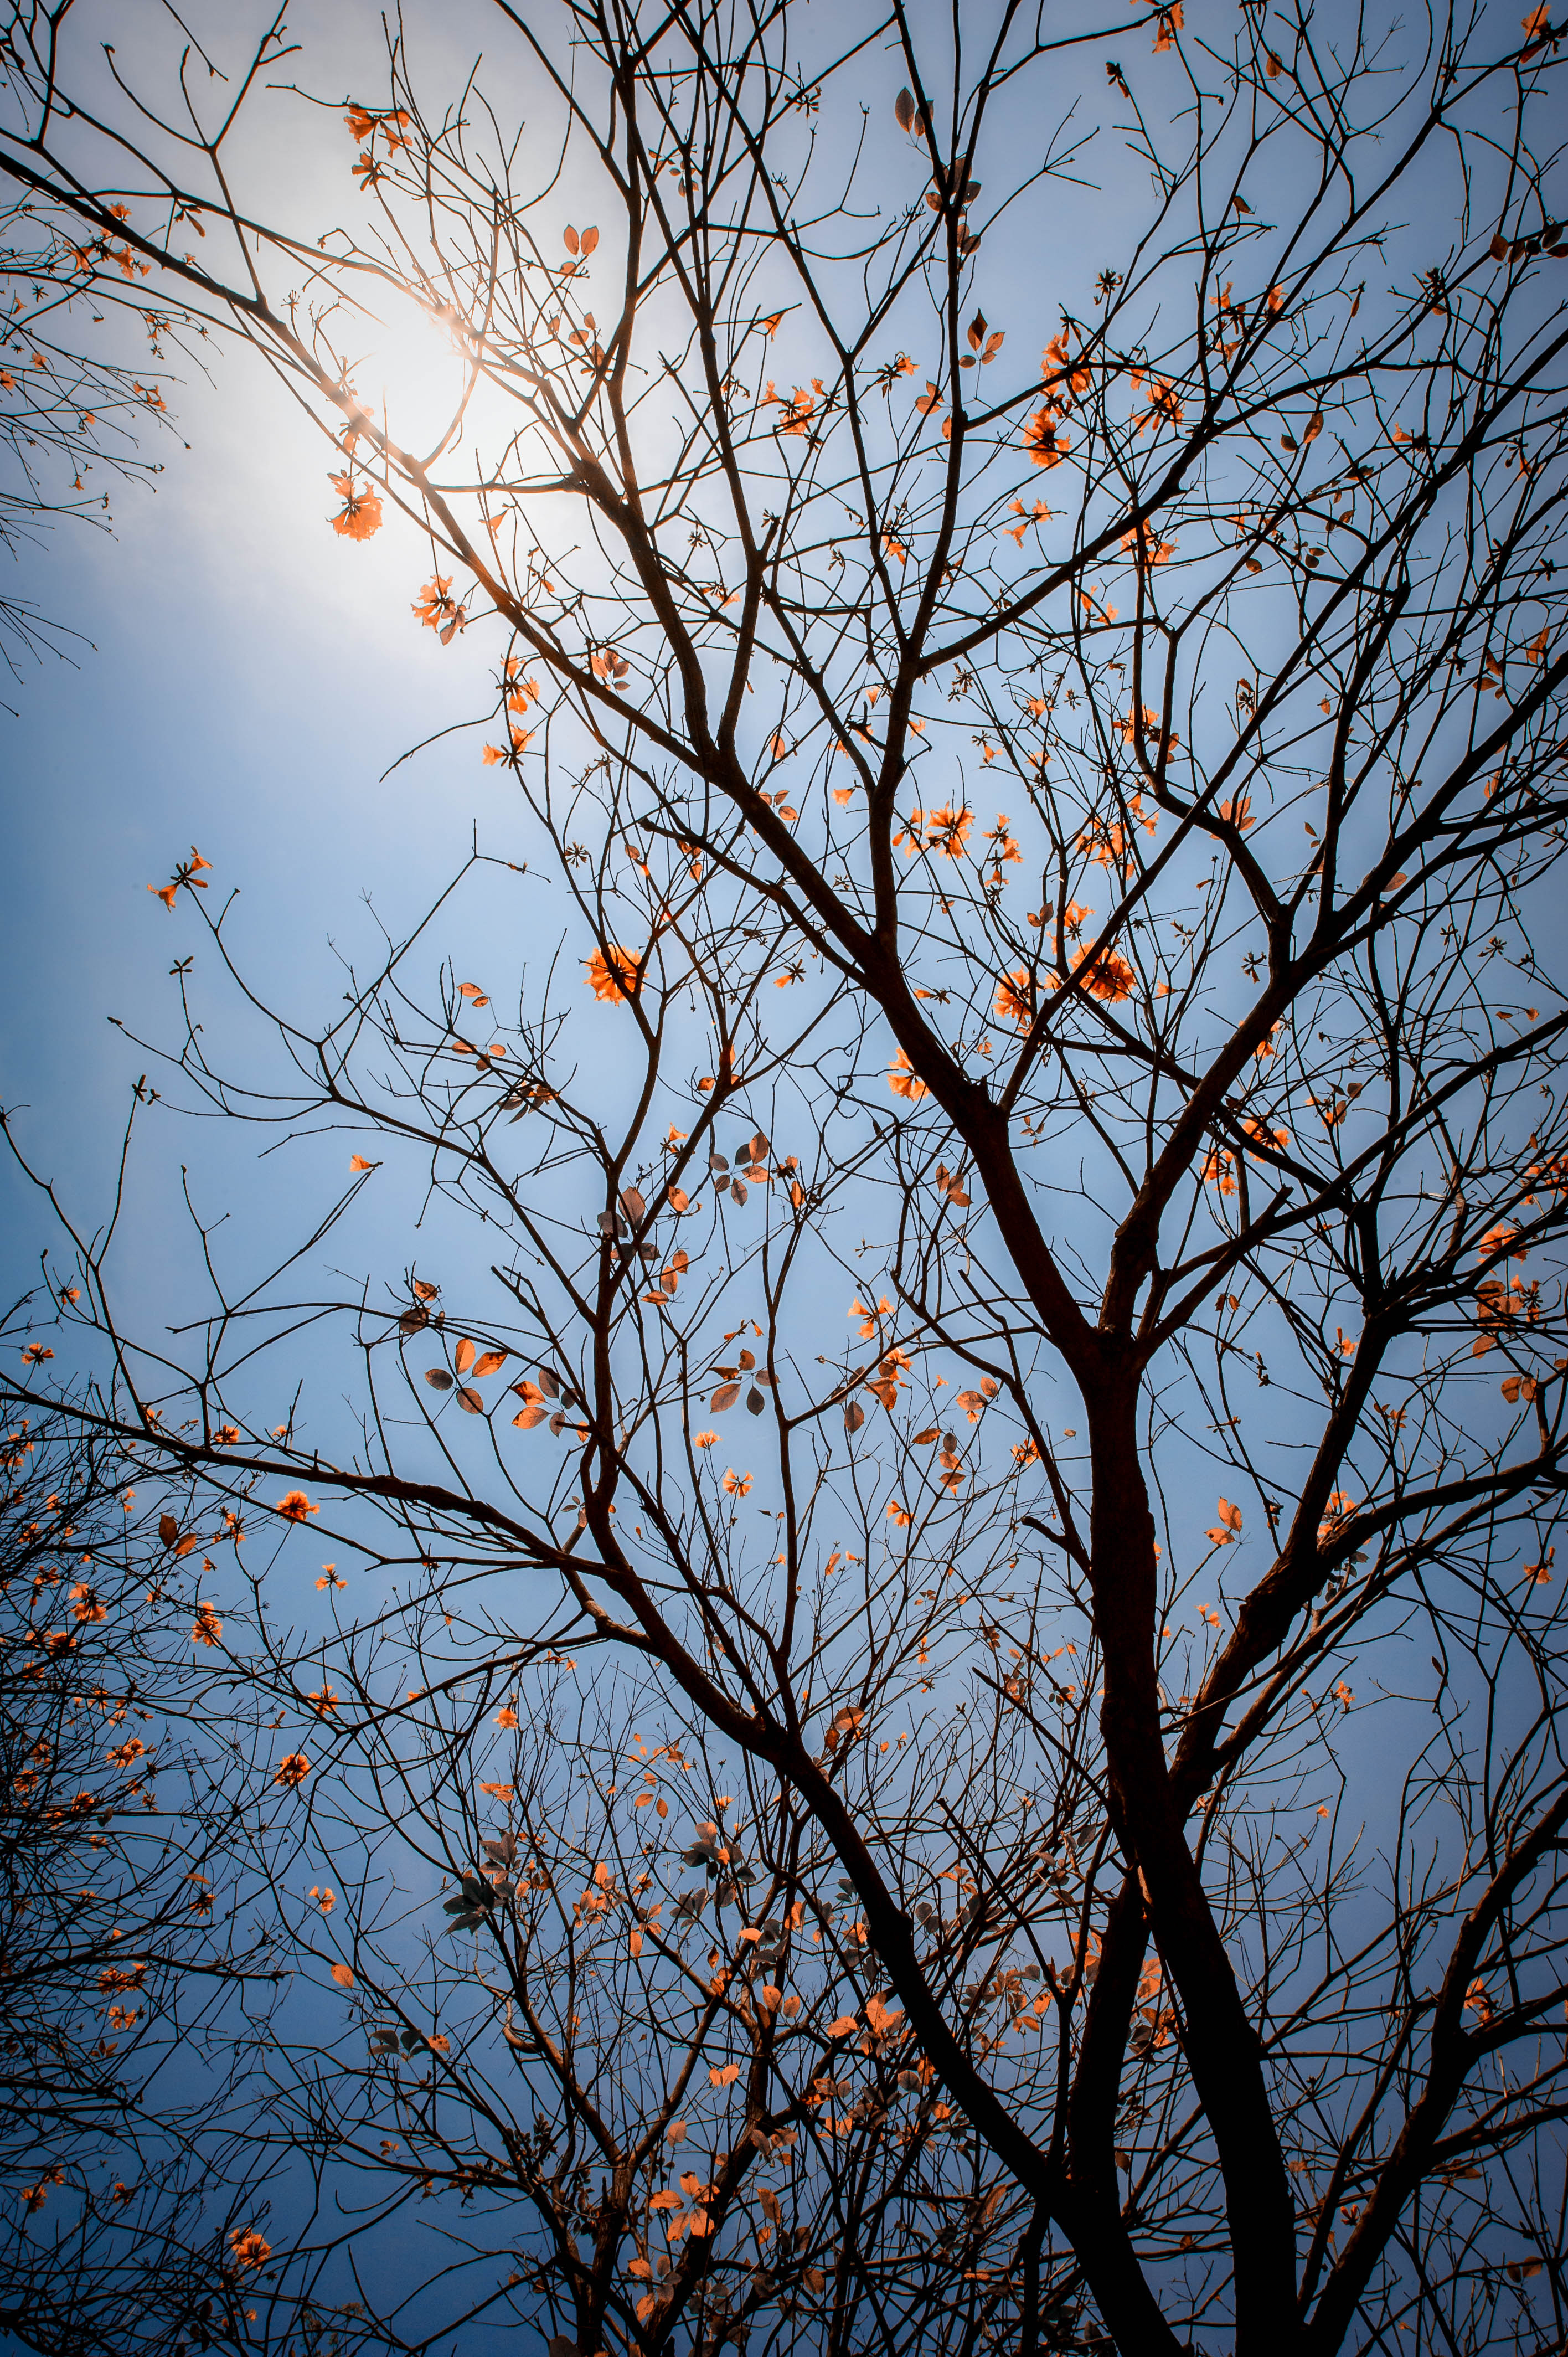 Free HD sky, leaves, nature, flowers, wood, tree, branches